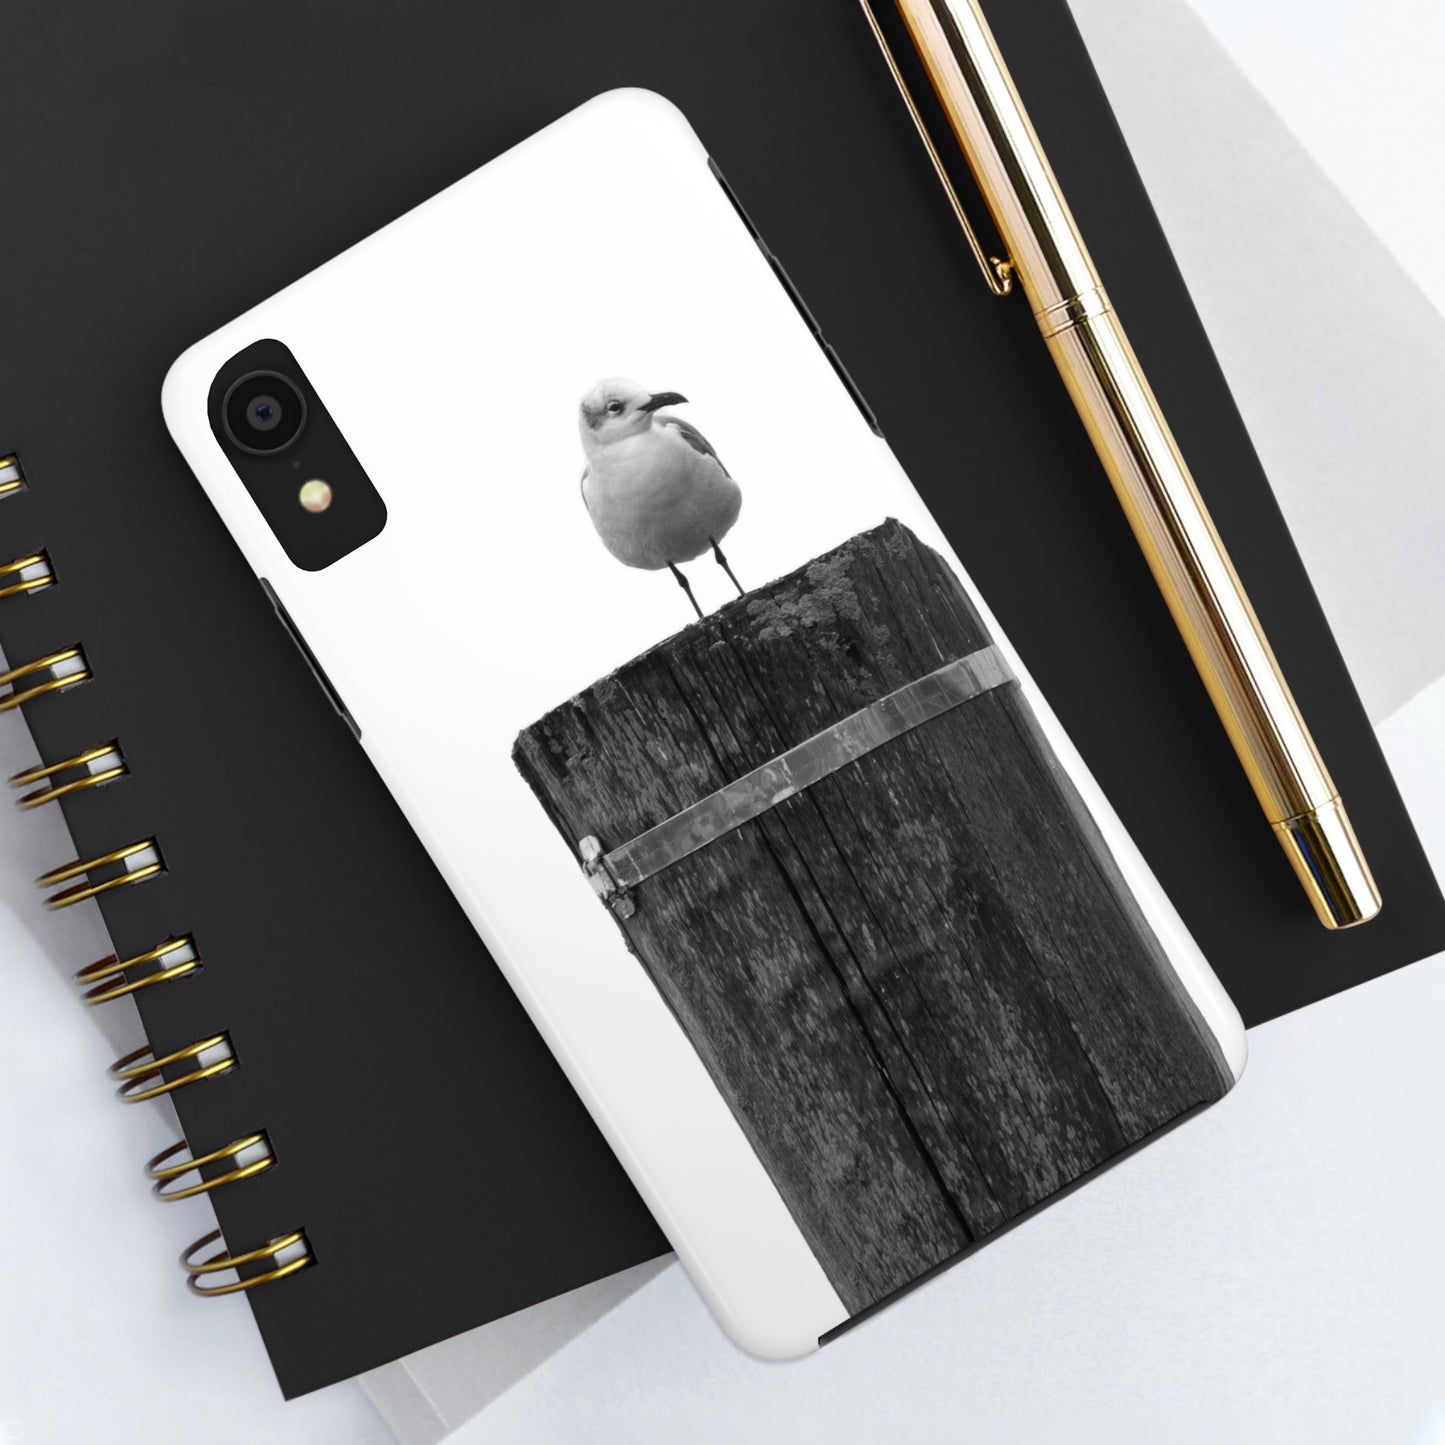 Gull on a Post Tough Phone Cases, Case-Mate